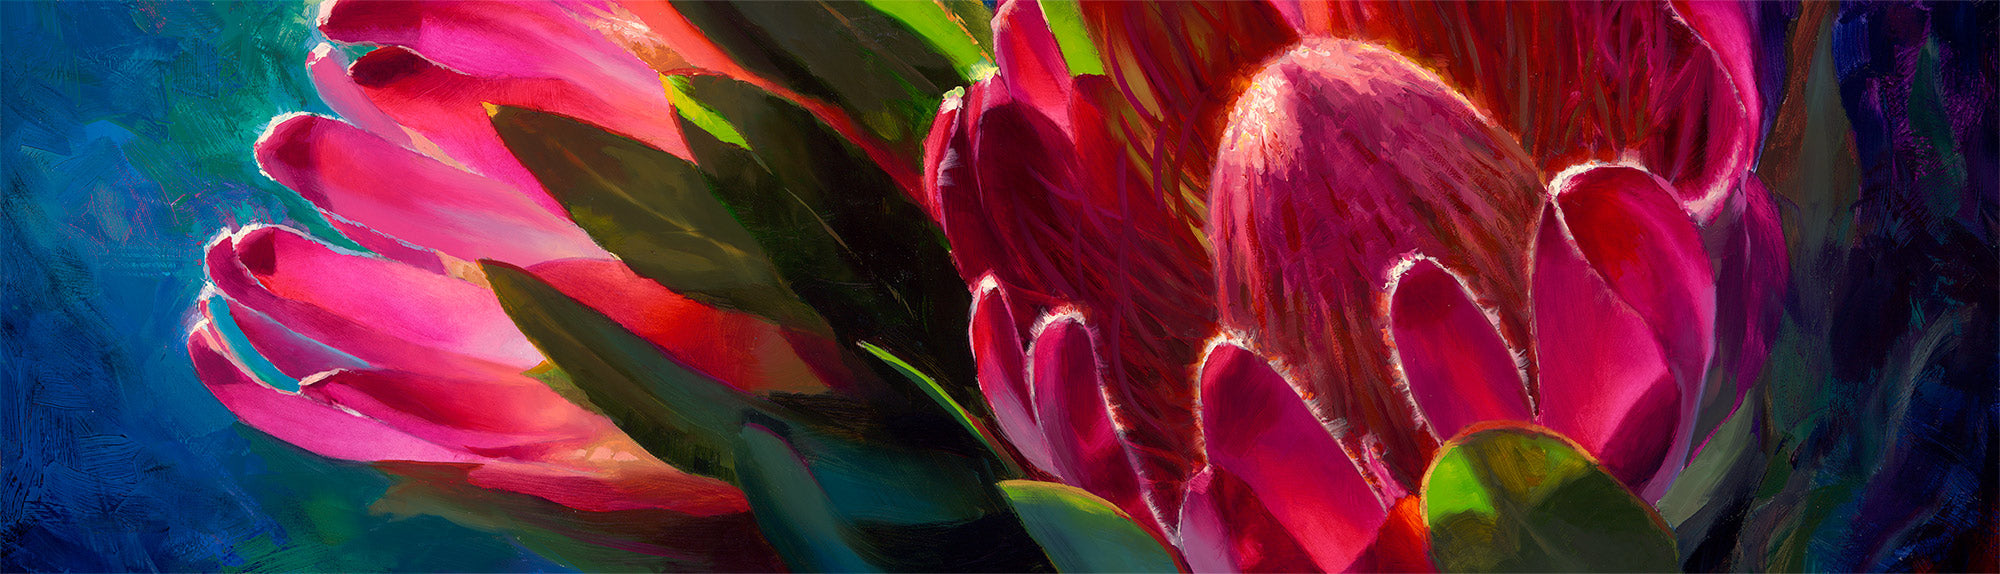 Close up of the painting "Sunlit Protea" of tropical Hawaiian flowers by gallery artist Karen Whitworth